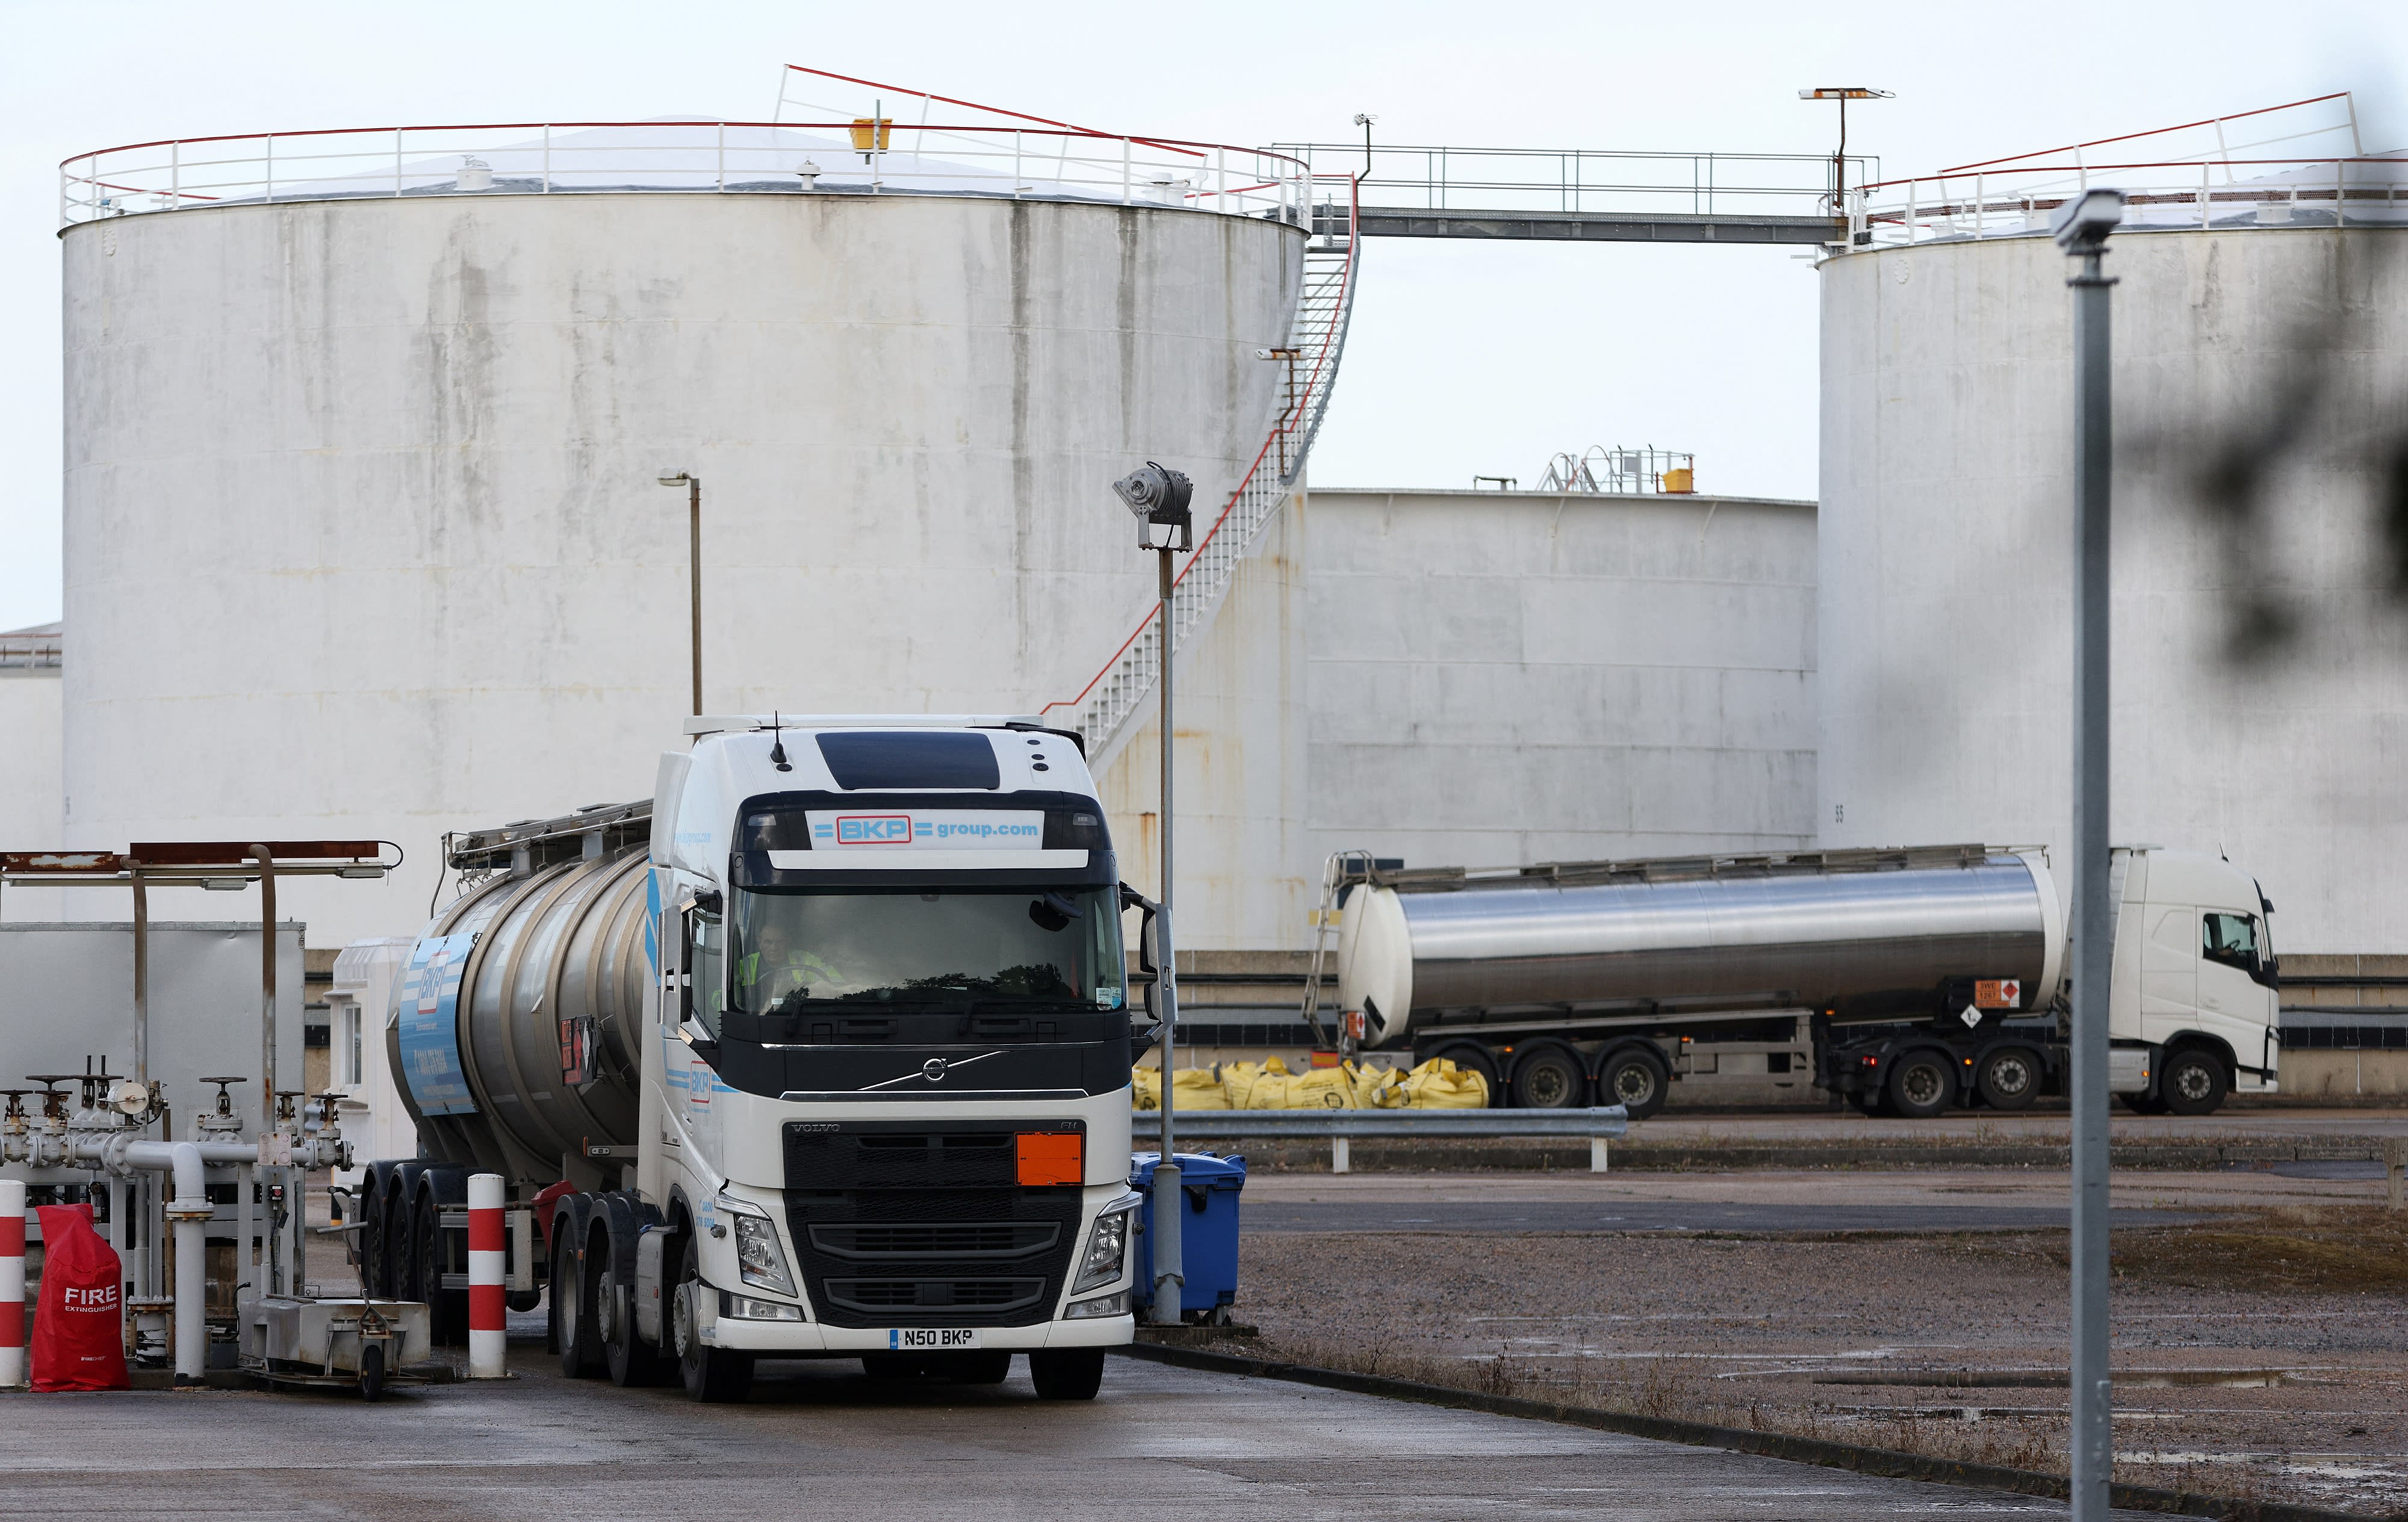 A tanker is refilled with crude oil at the BP oil refinery in Hamble, near Southampton, southern England.